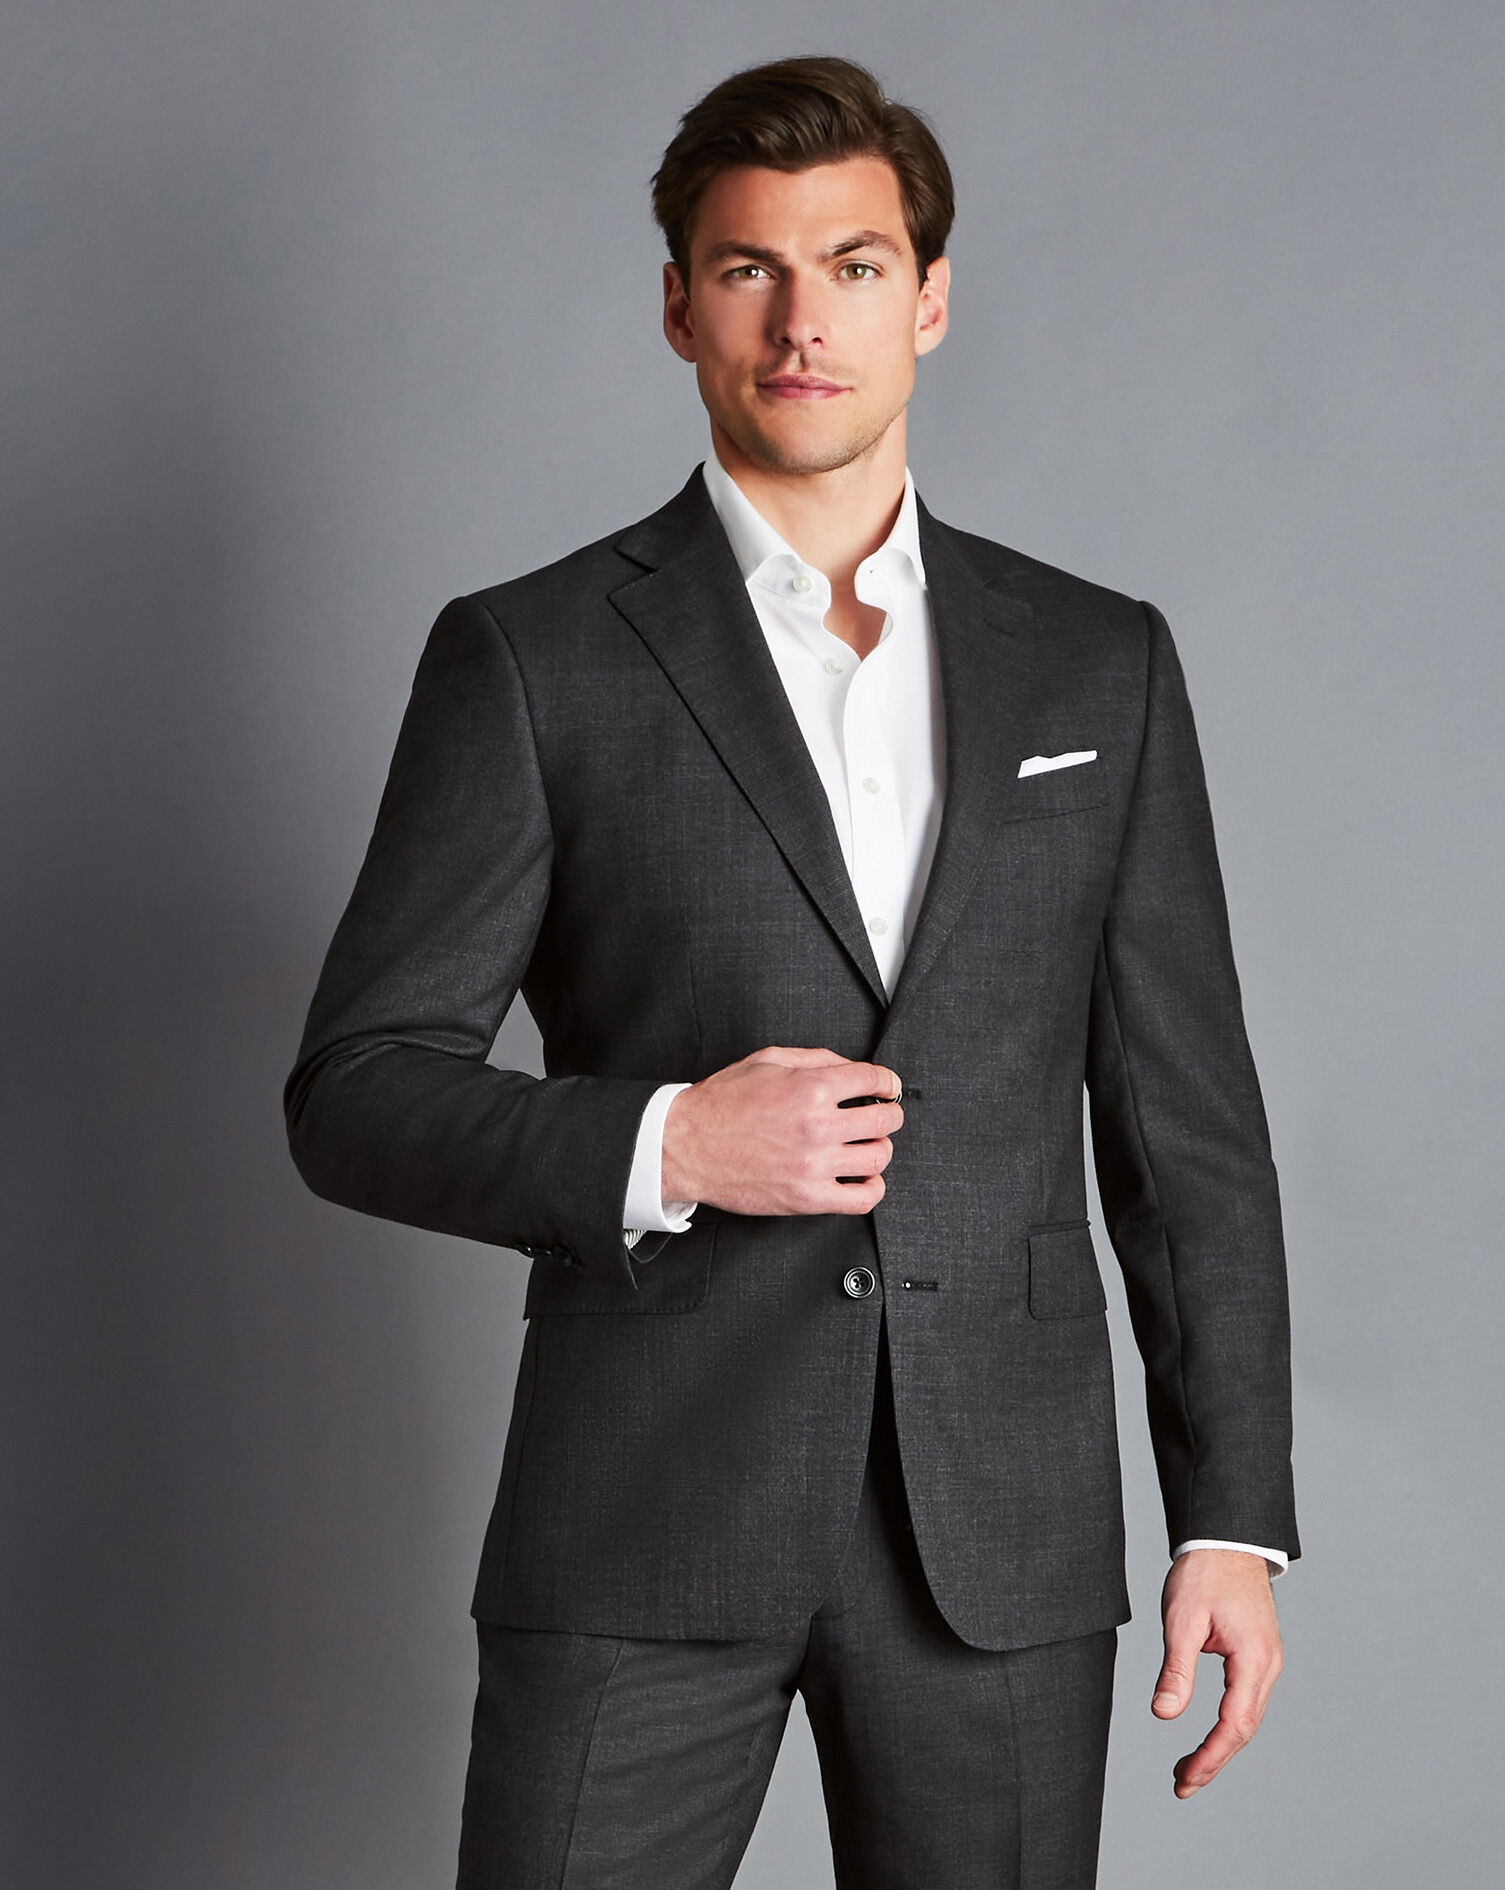 Wearing A Suit Jacket With Jeans (Master The Broken Suit!)